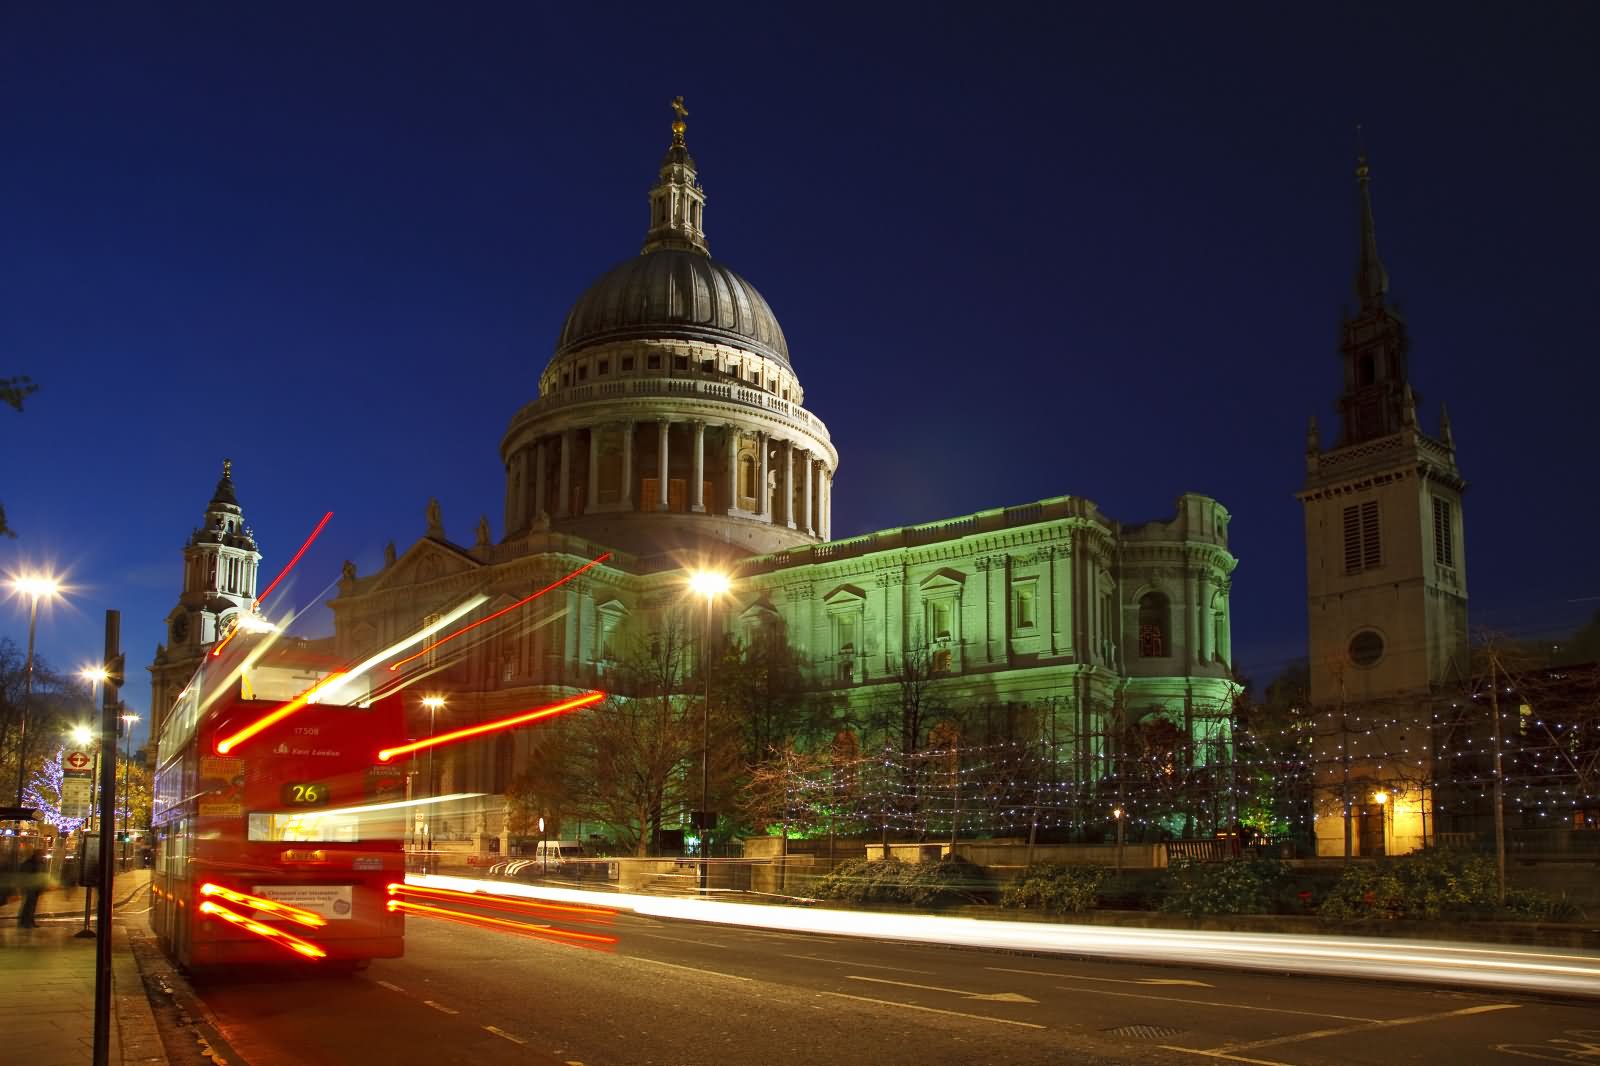 The St Paul's Cathedral Night Picture